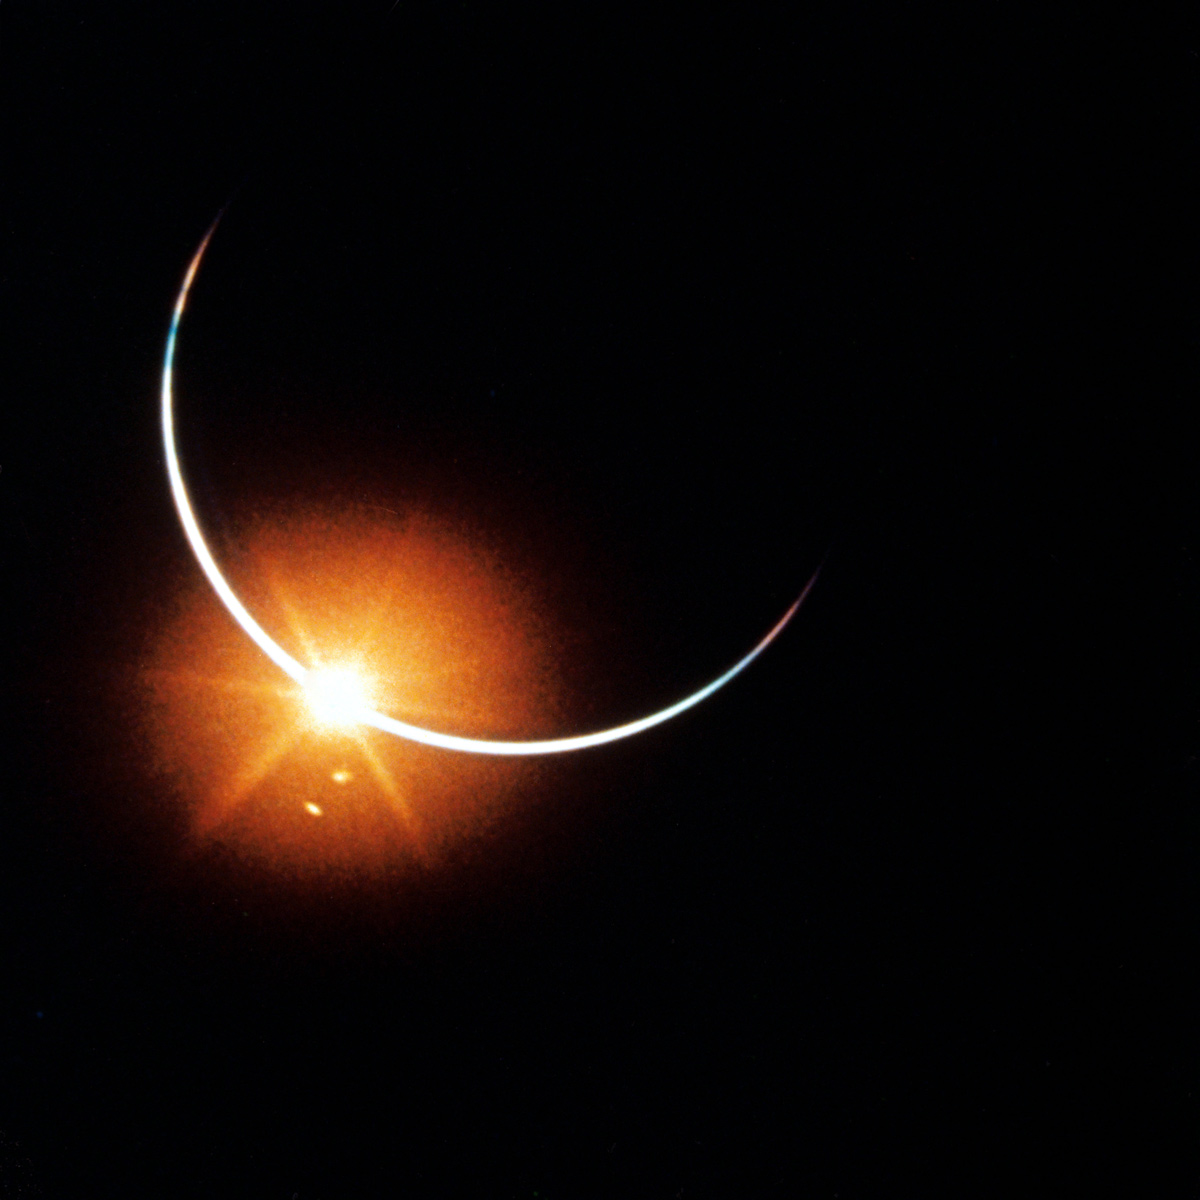 Sun eclipsed by the Earth. Only a sliver of a crescent is visible, with a single point glowing large and bright like the jewel on a ring.